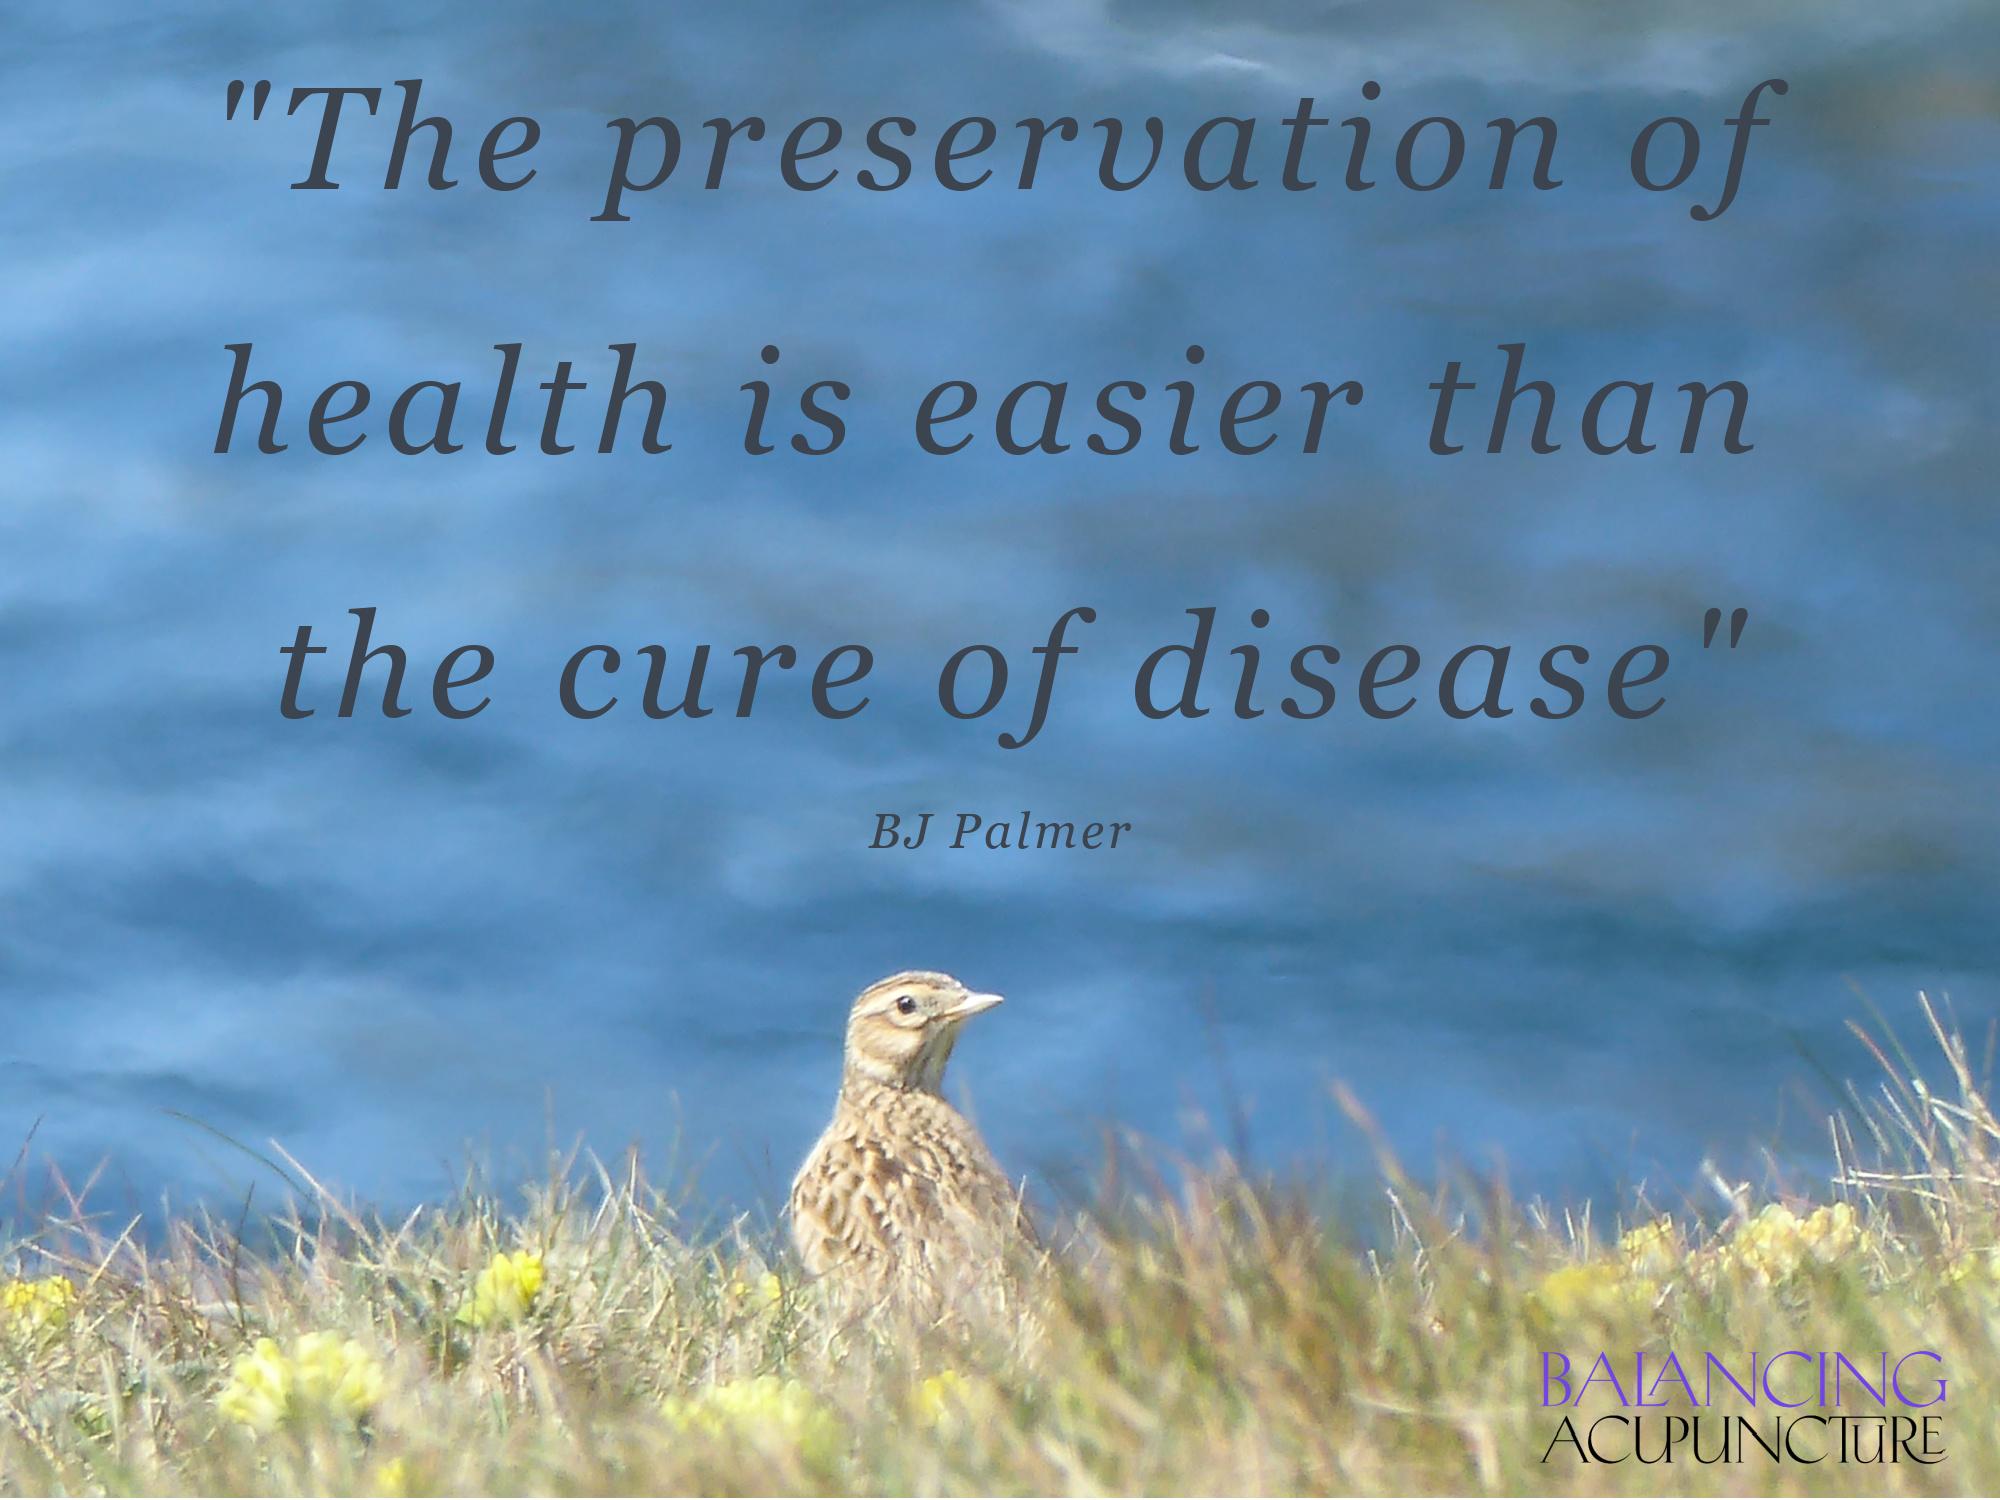 The preservation of health is easier than the cure of diseasejpg